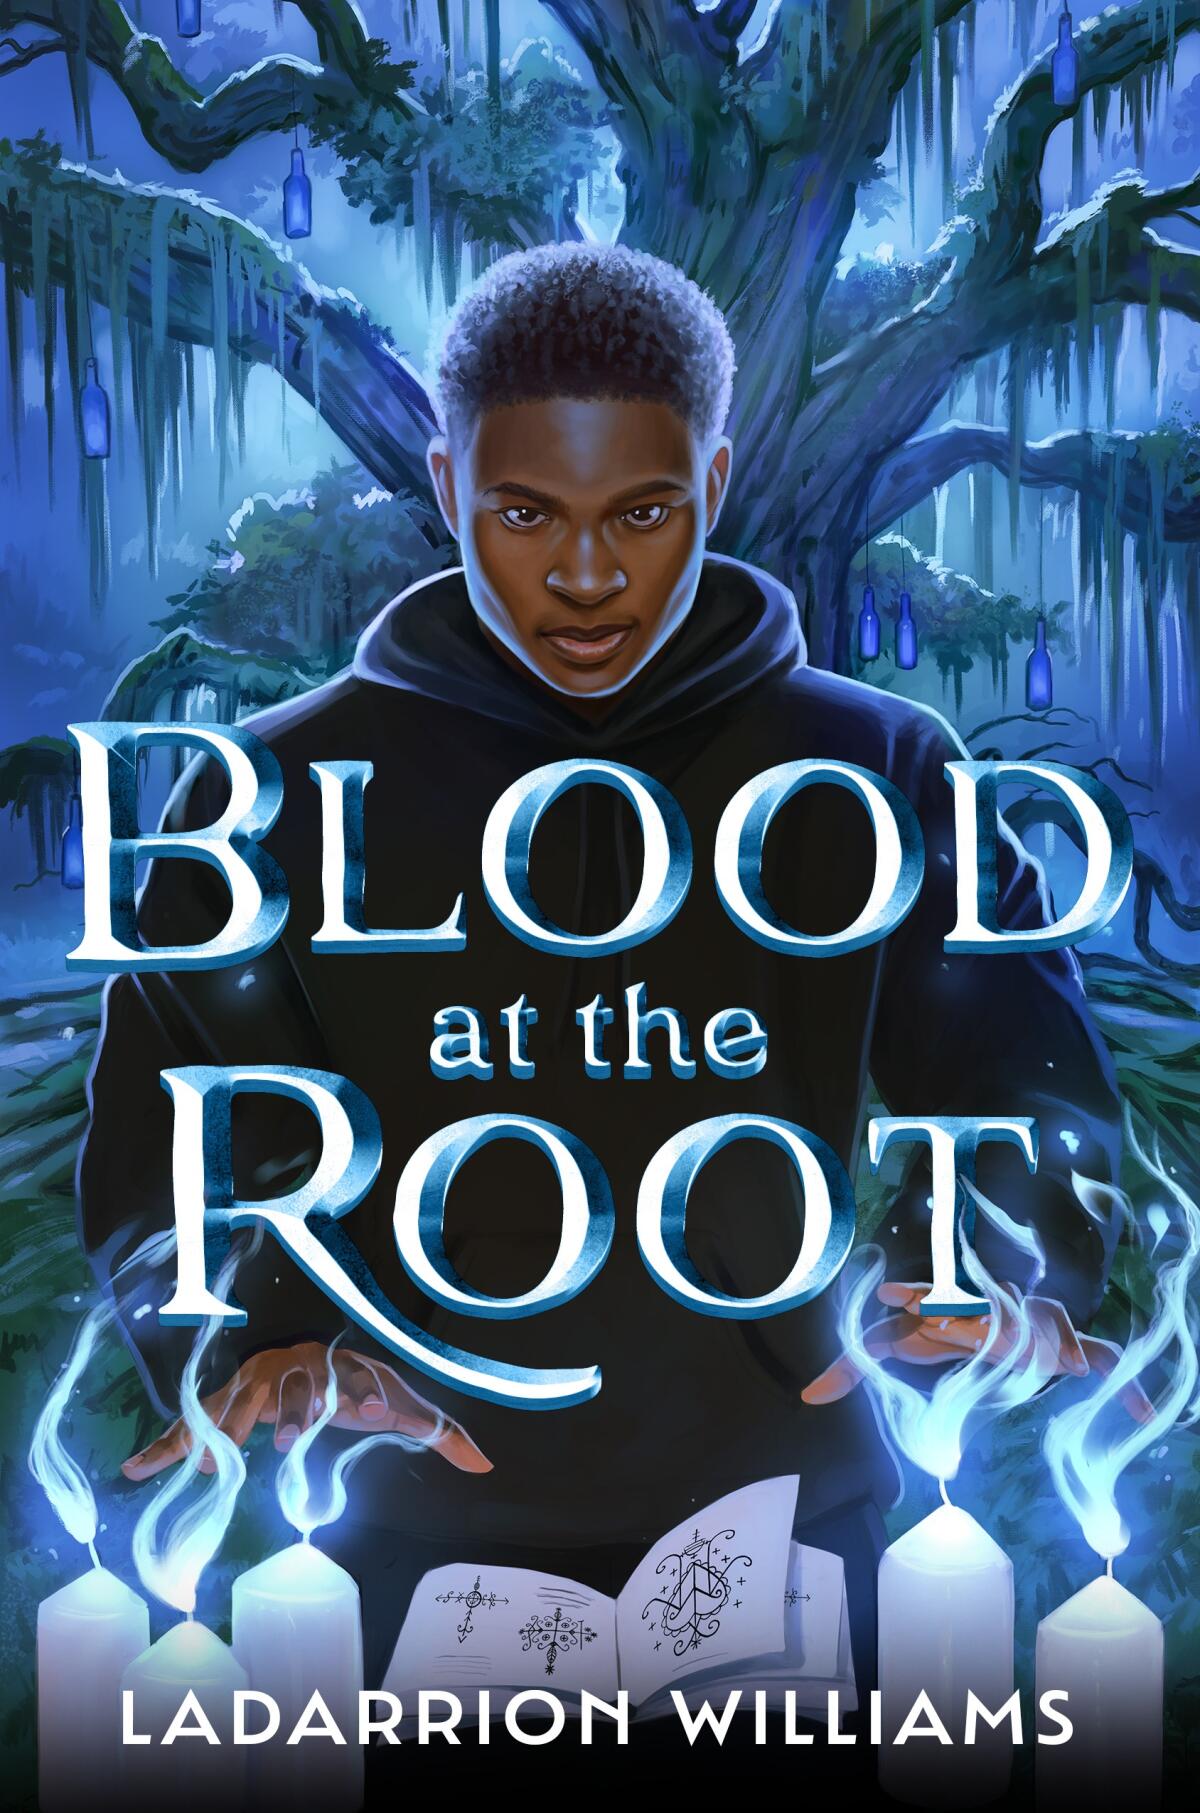 "Blood at the Root" by LaDarrion Williams